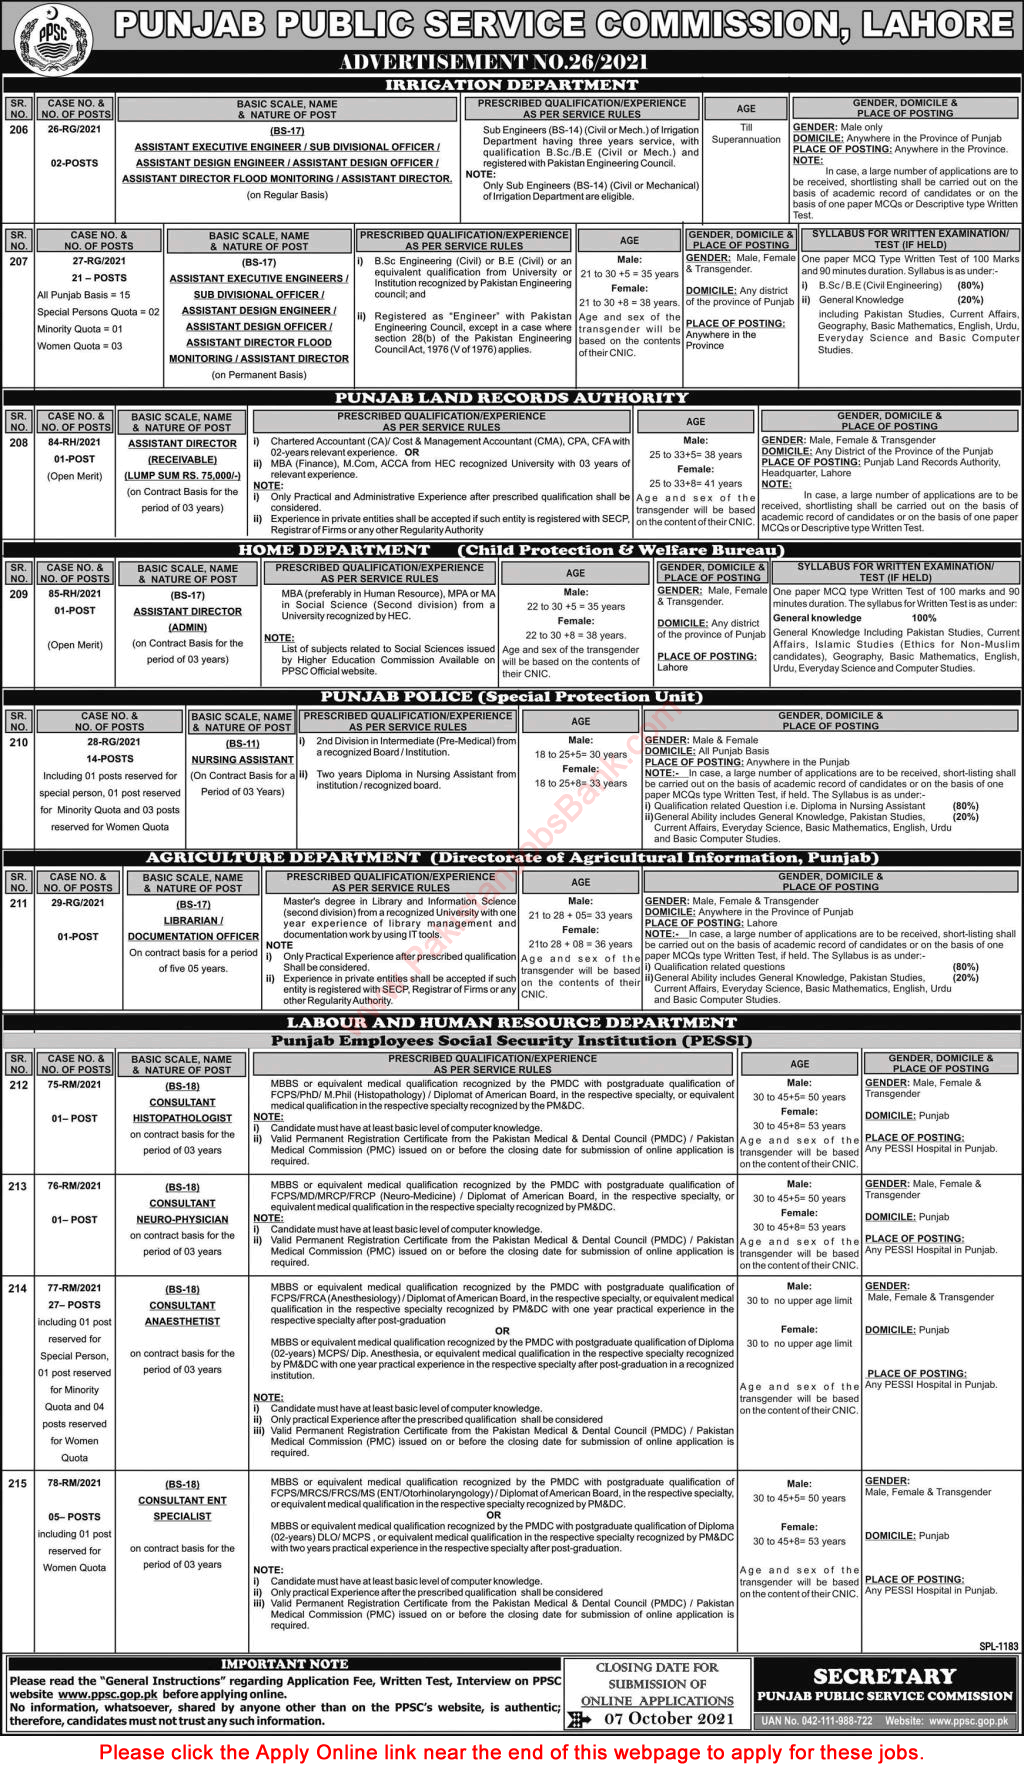 PPSC Jobs September 2021 Apply Online Consolidated Advertisement No 26/2021 Latest